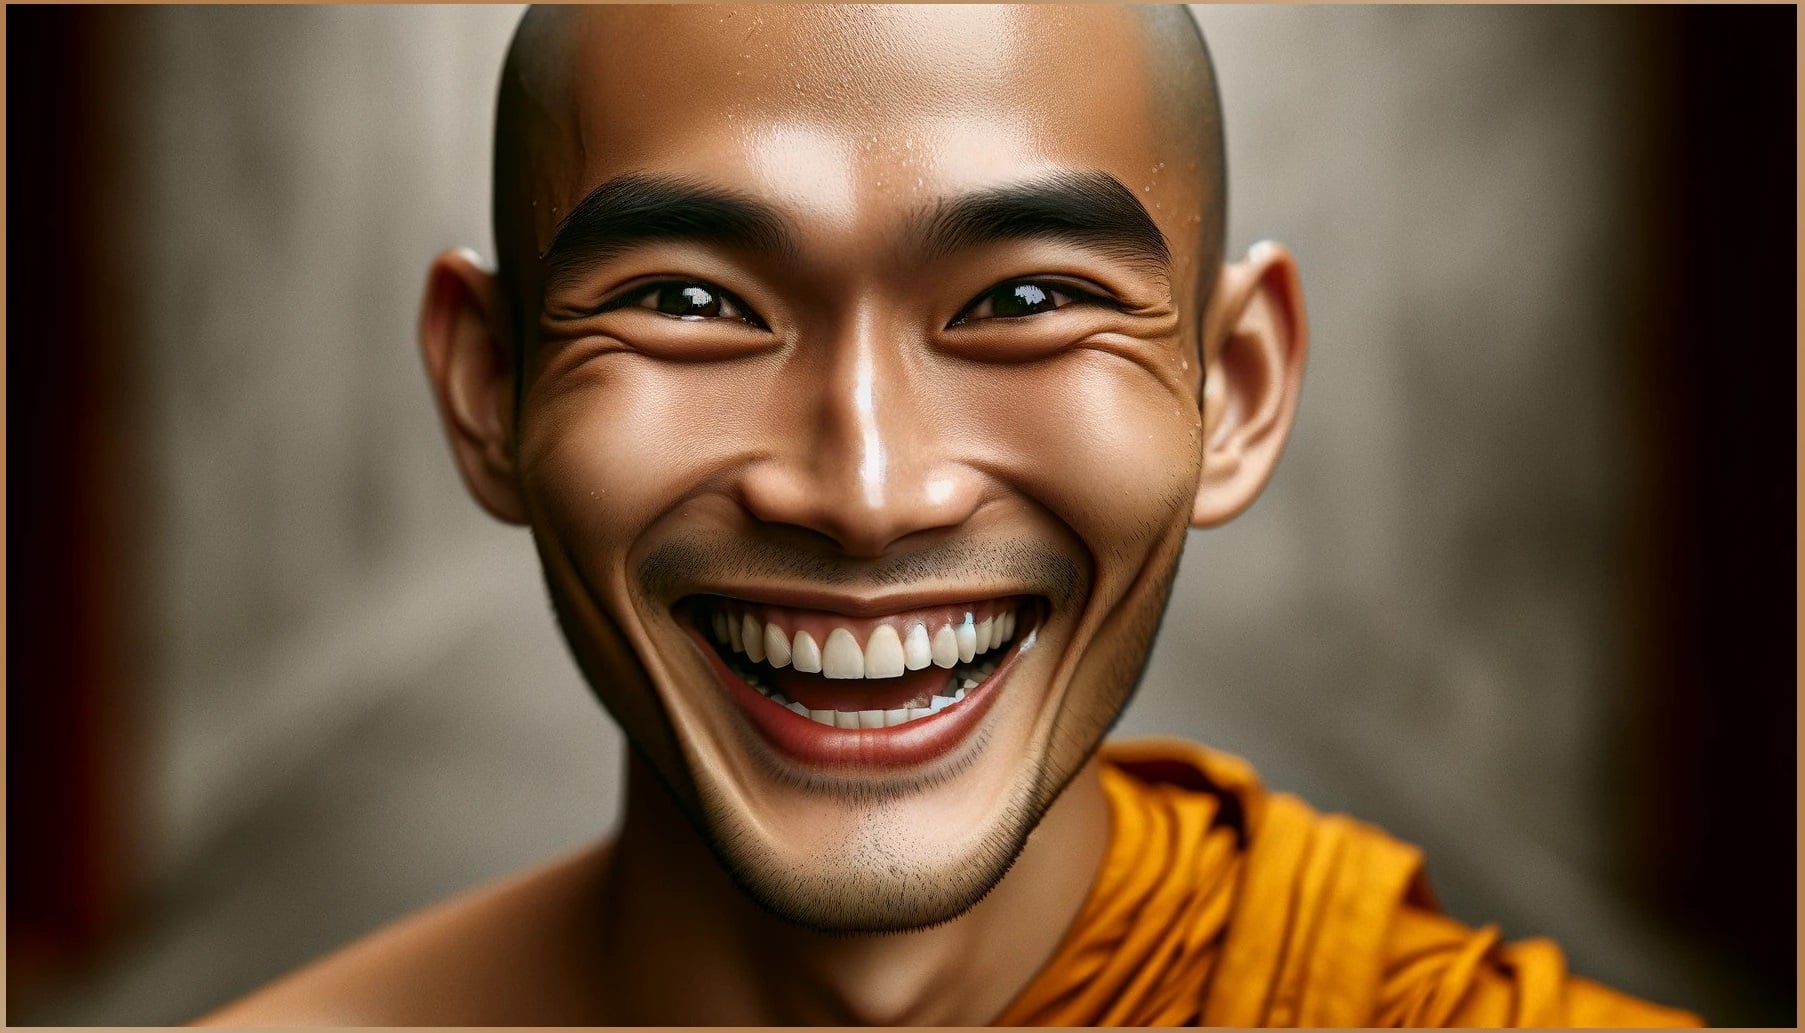 A Buddhist person smiling broadly, embodying the joy of Ten Million Day in Buddhism, wearing traditional saffron robes, with a focus on their expressive face and the emotion of the celebration.